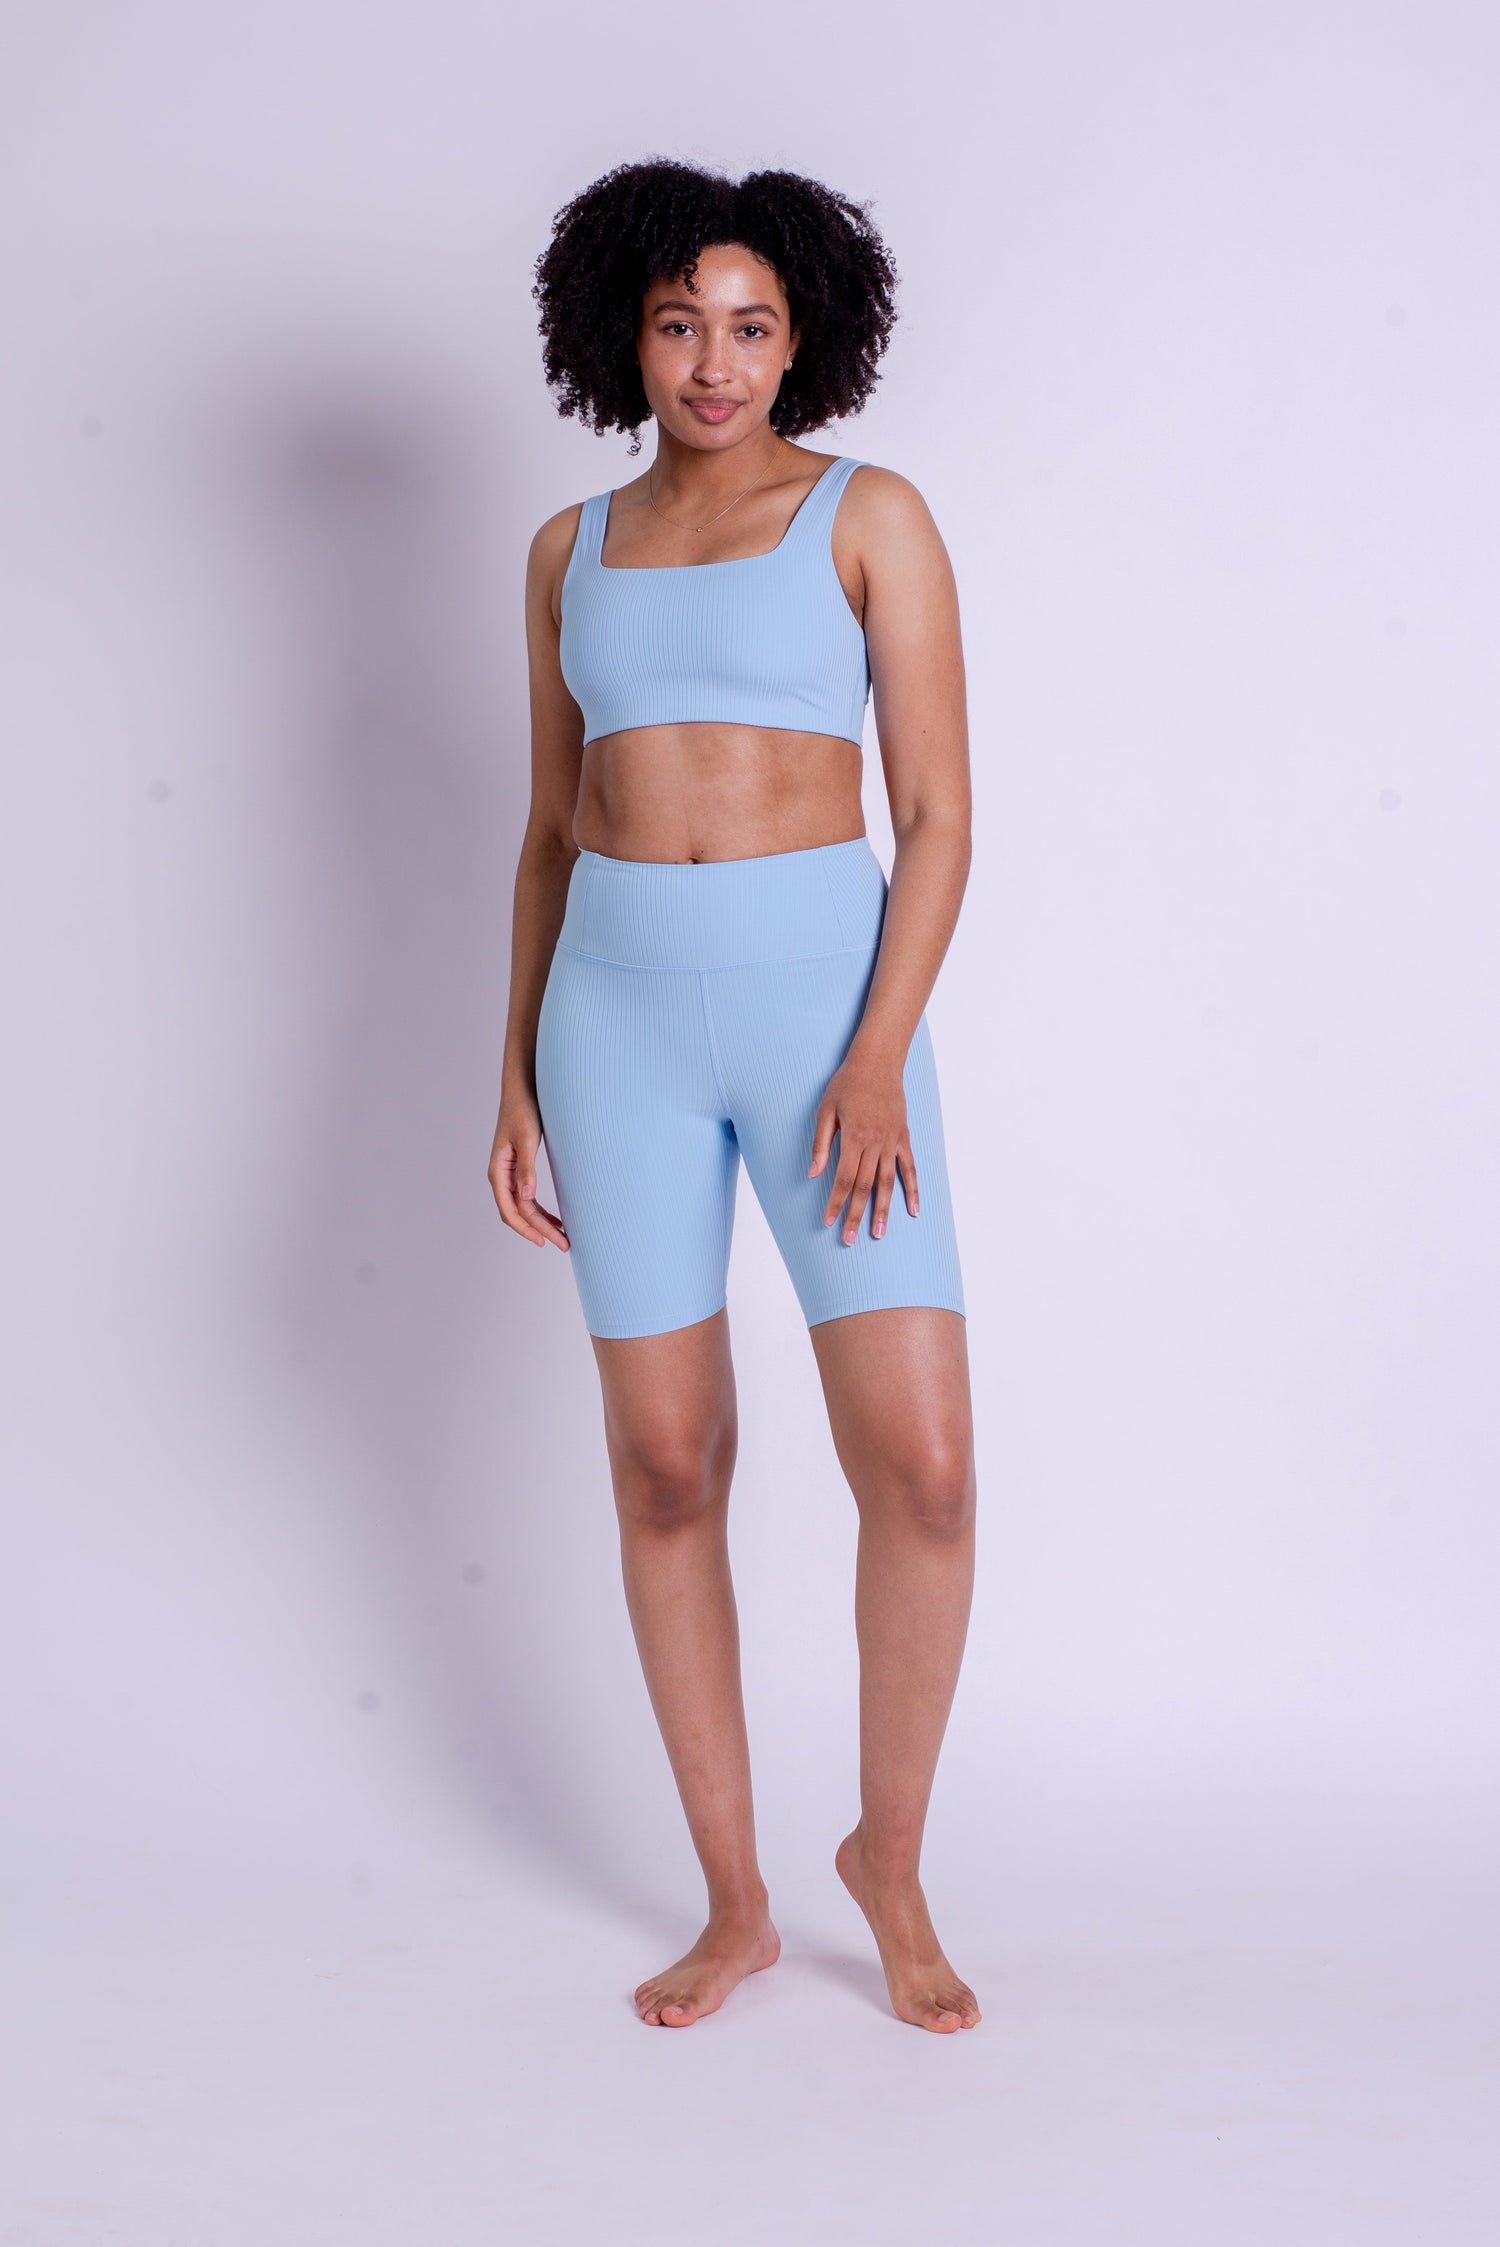 Girlfriend Collective RIB Bike Shorts - Made from recycled plastic bottles Bluebell Pants